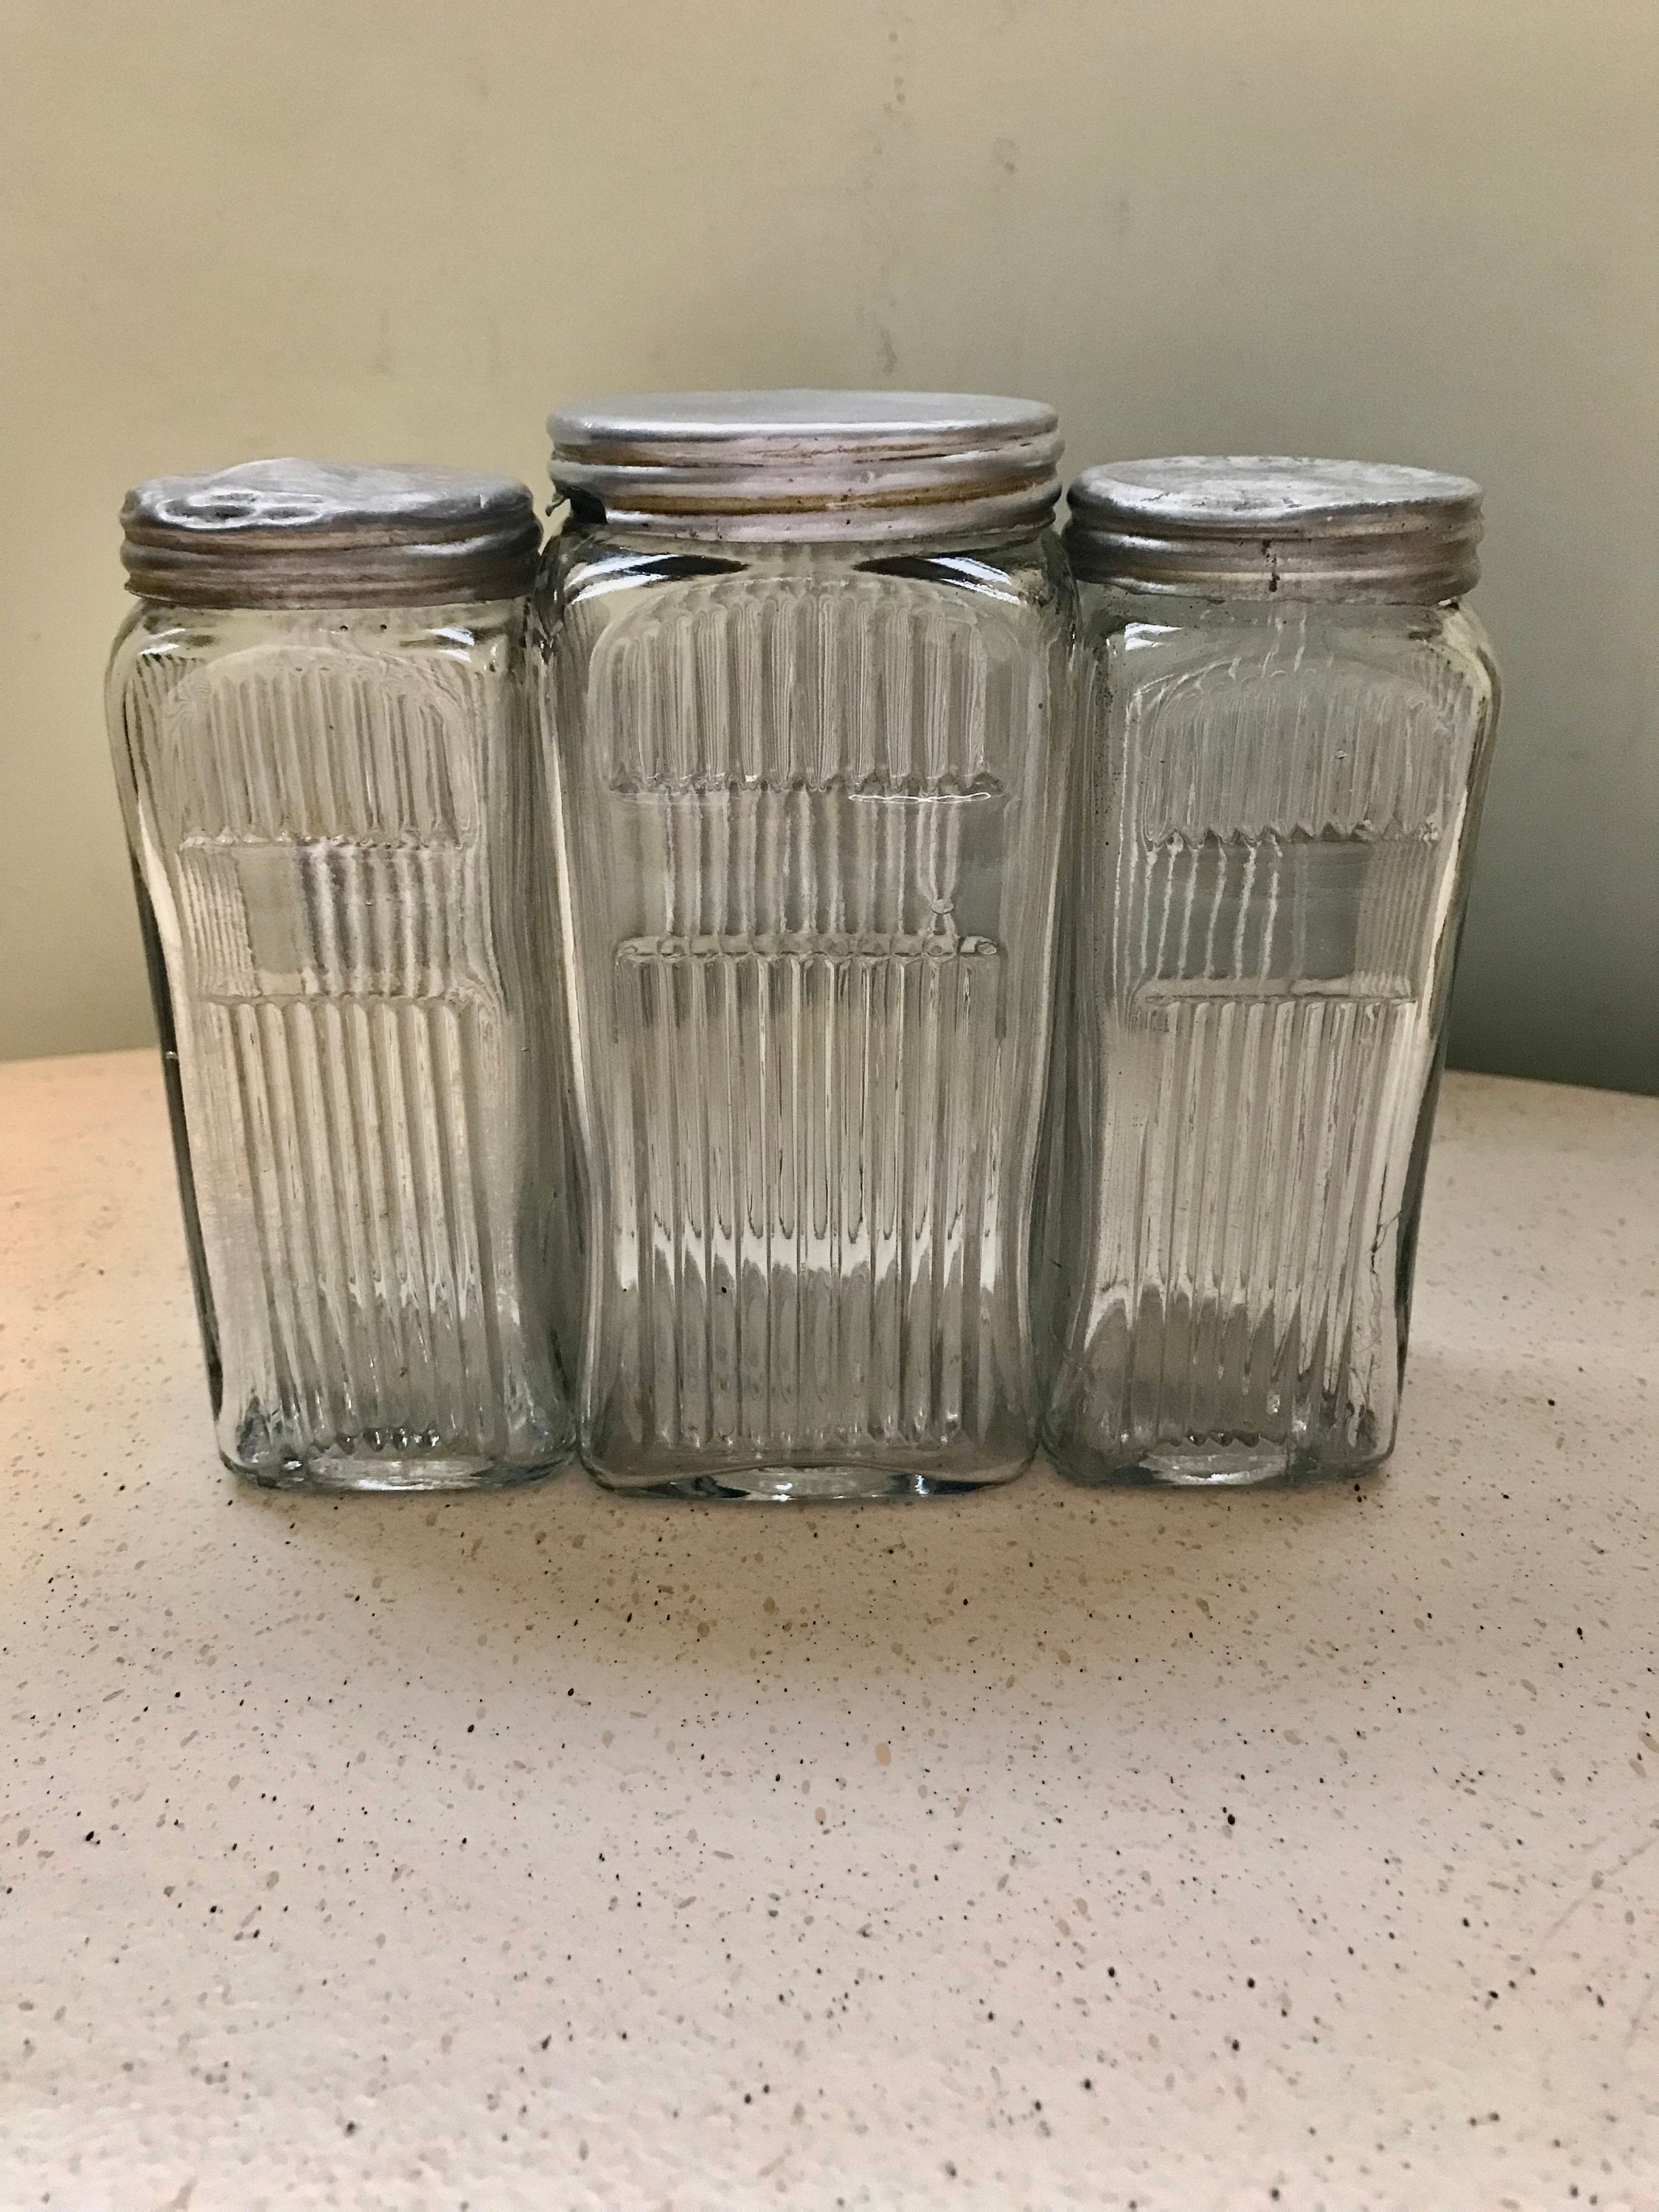 Vintage Hoosier Cabinet Colonial Canister, Large Sneath Spice Jar With  Sliding Closure Lid, Retro Kitchenalia, Grannycore Kitchen, FLAWS 